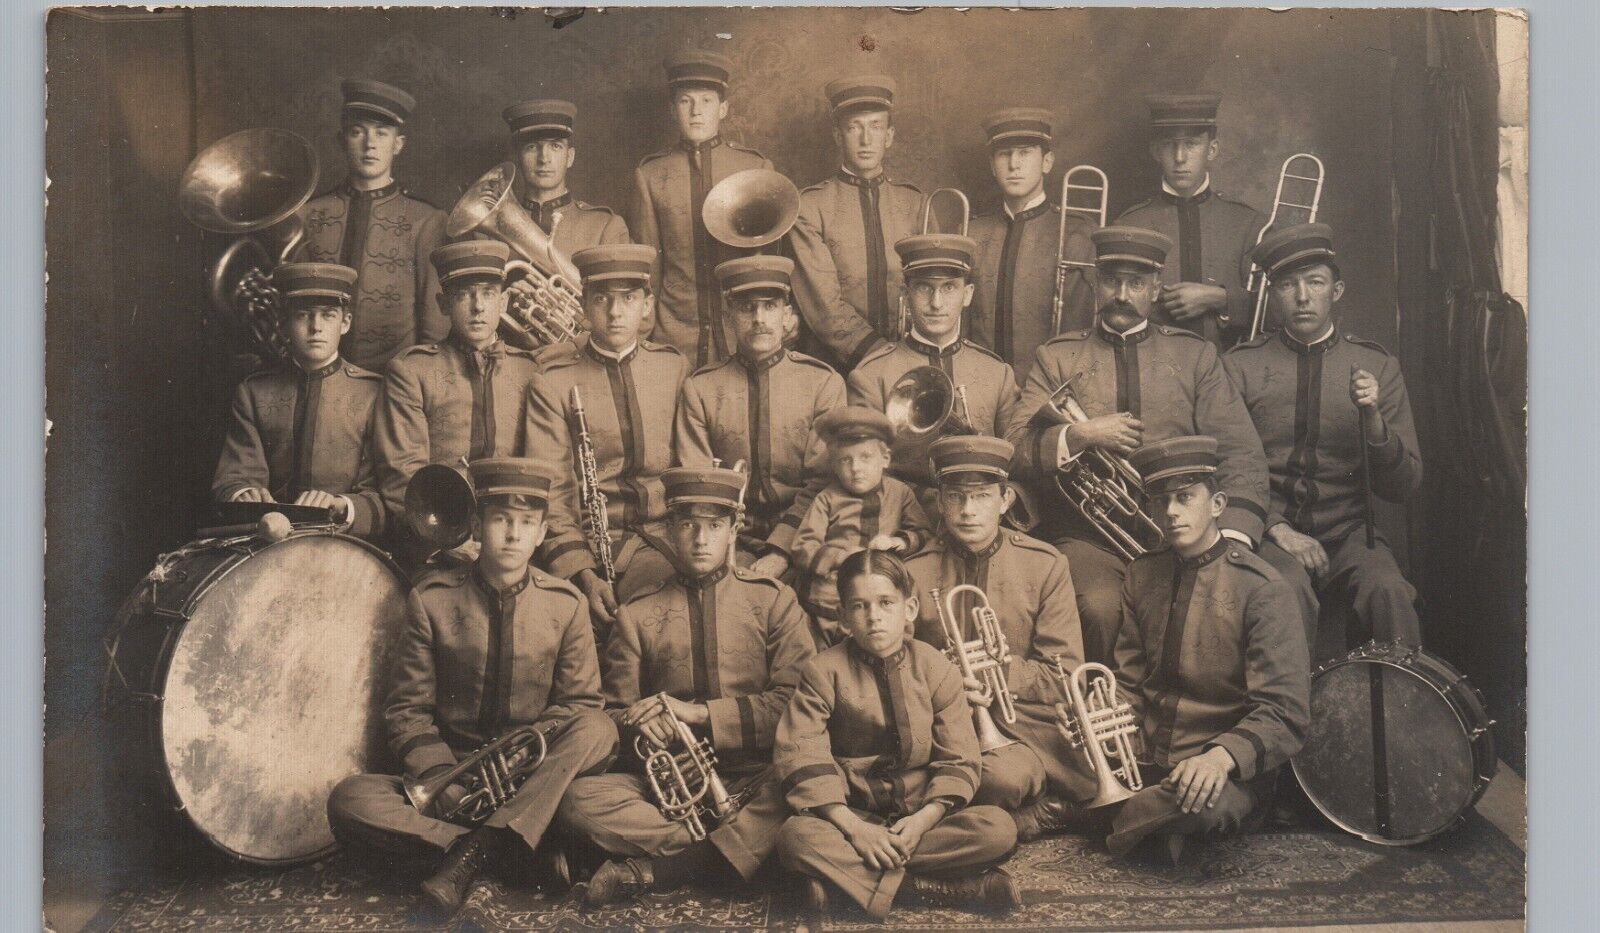 MARCHING BAND c1910 real photo postcard rppc downtown main street parade music